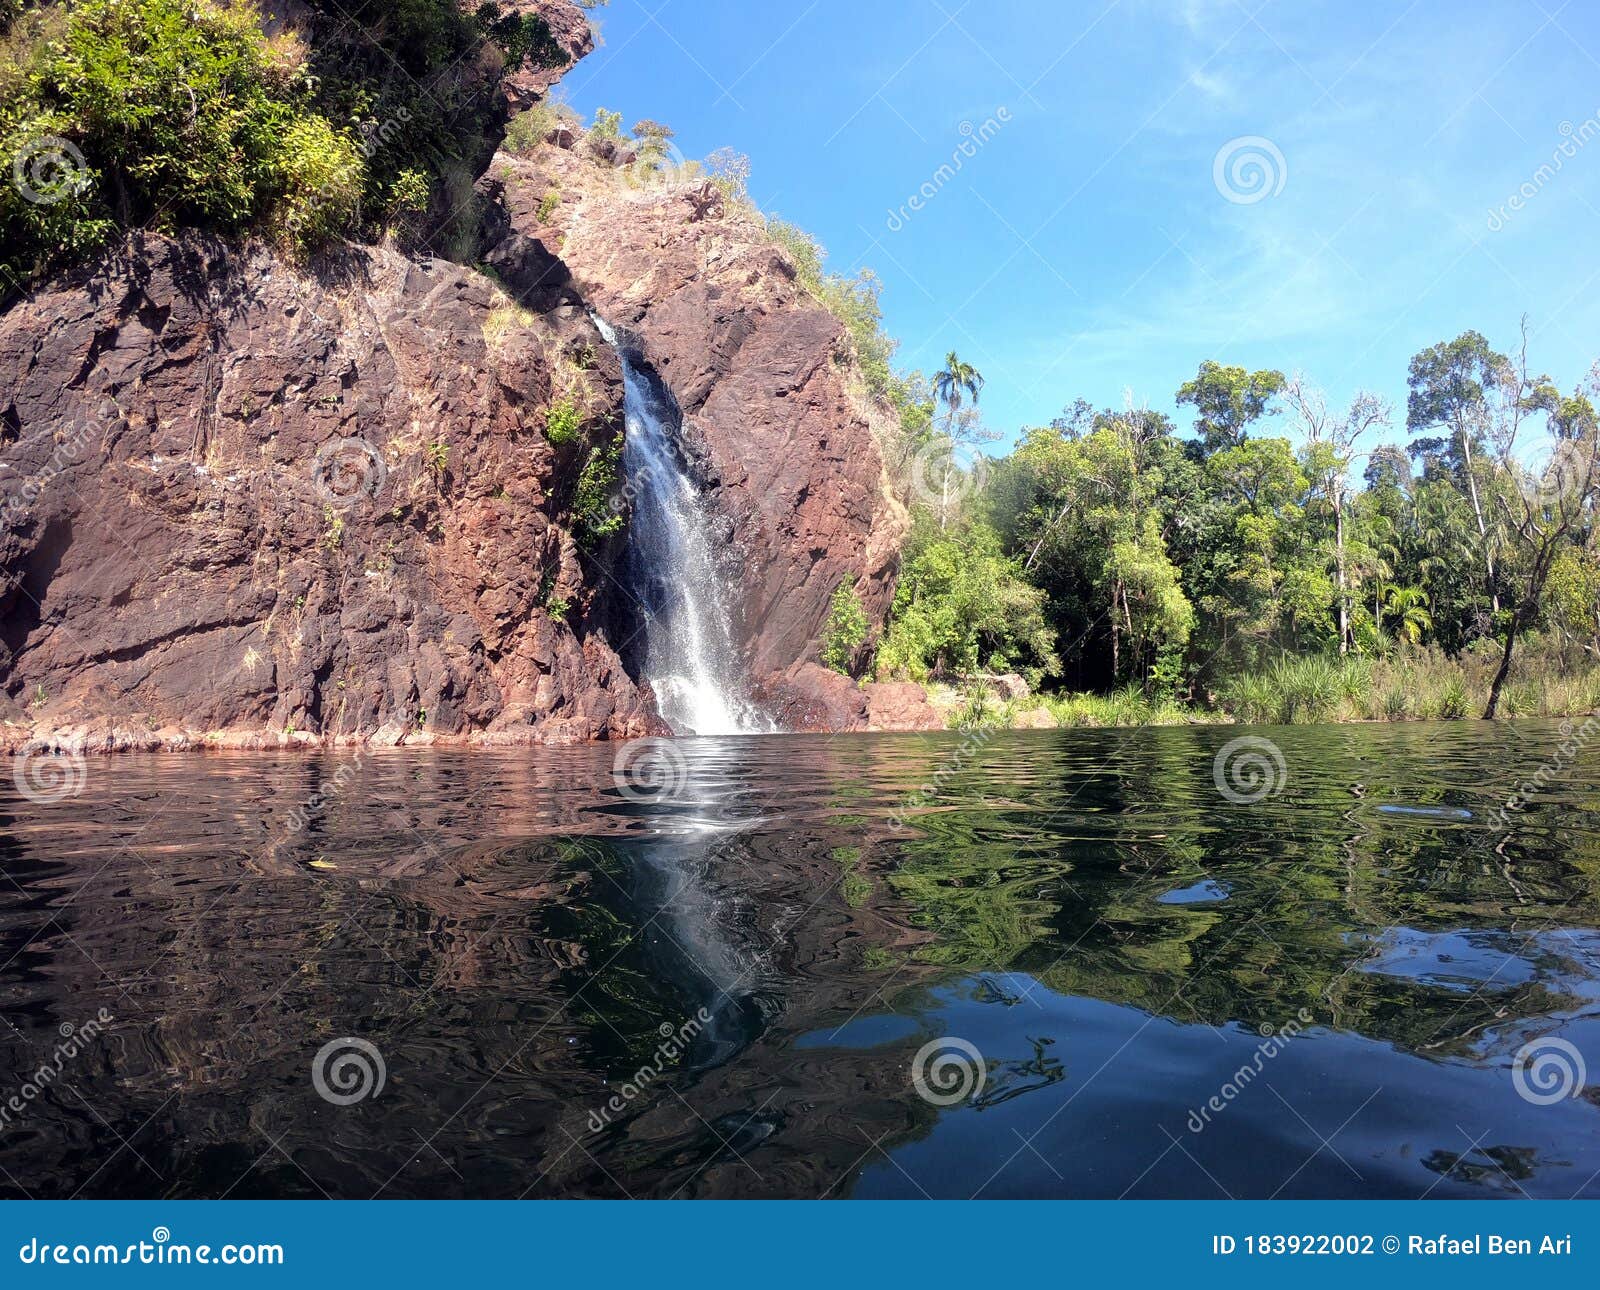 wangi falls in litchfield national park in the northern territory of australia